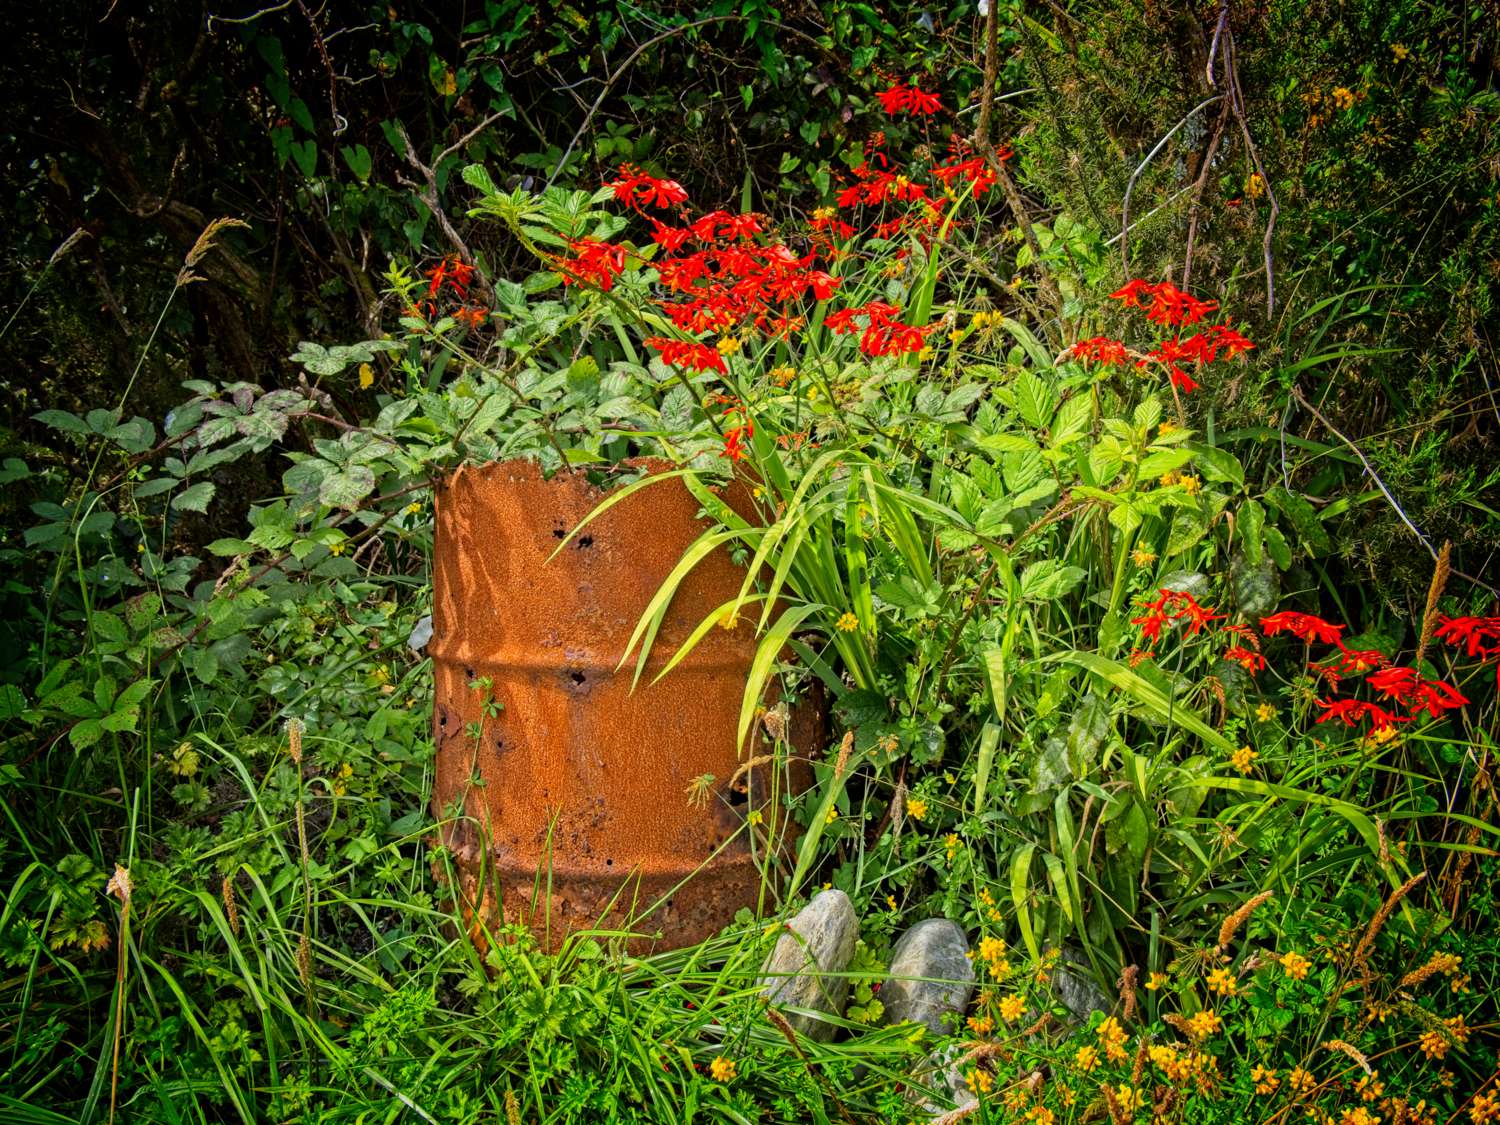 Auto ISO - a rusty drum taking on a life of its own as new growth swallows it up